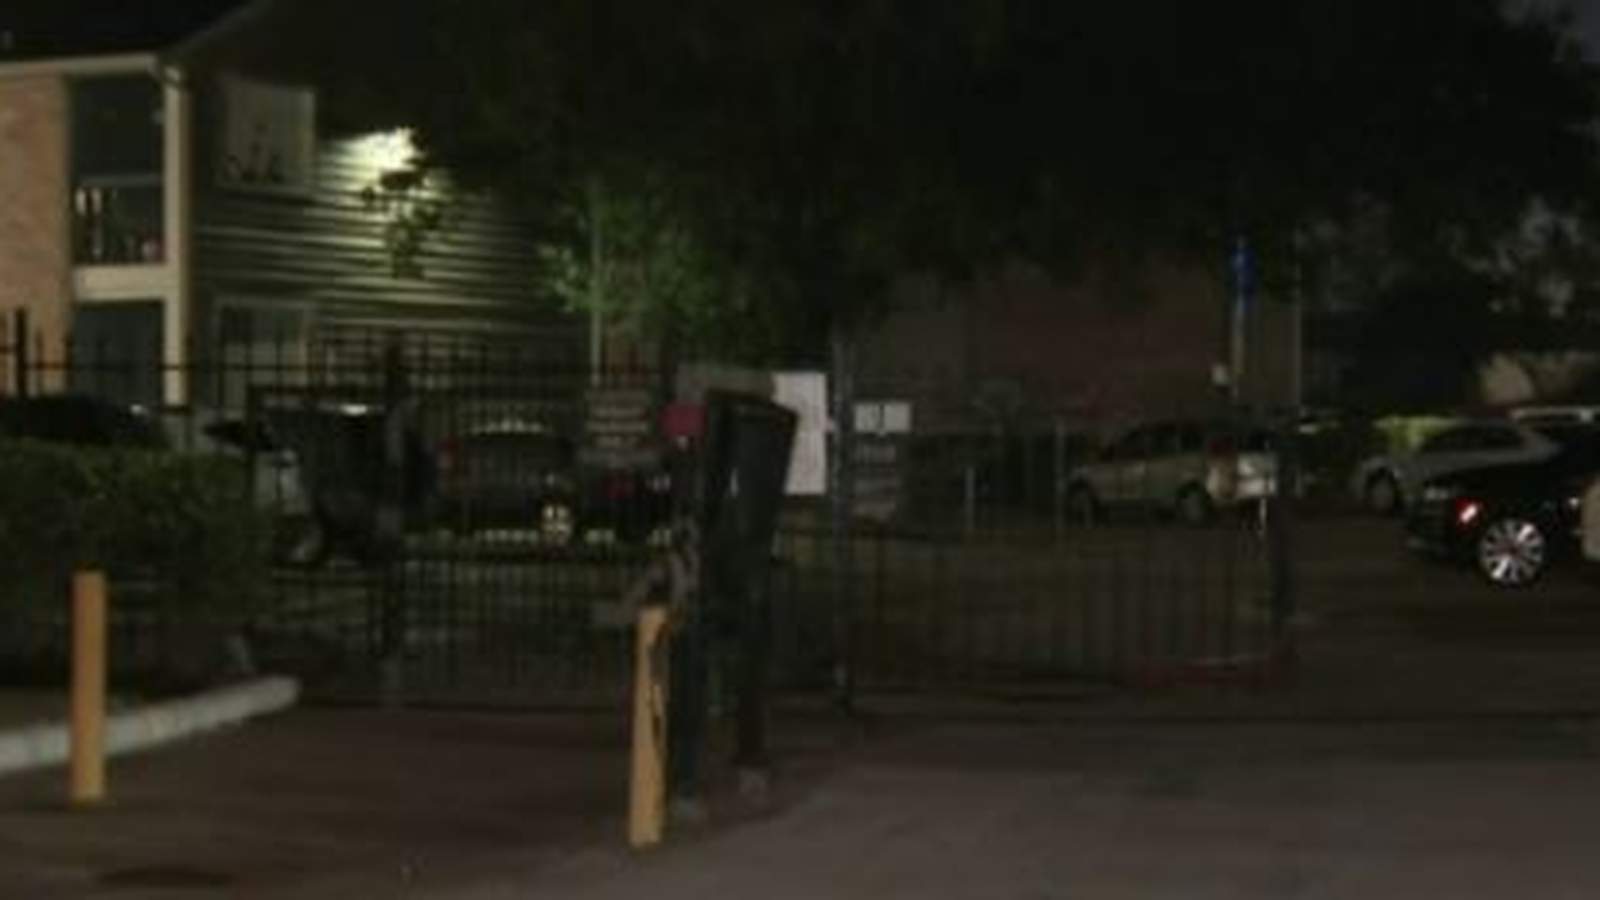 Man found shot to death in parking lot of apartment complex in NW Harris County, deputies say